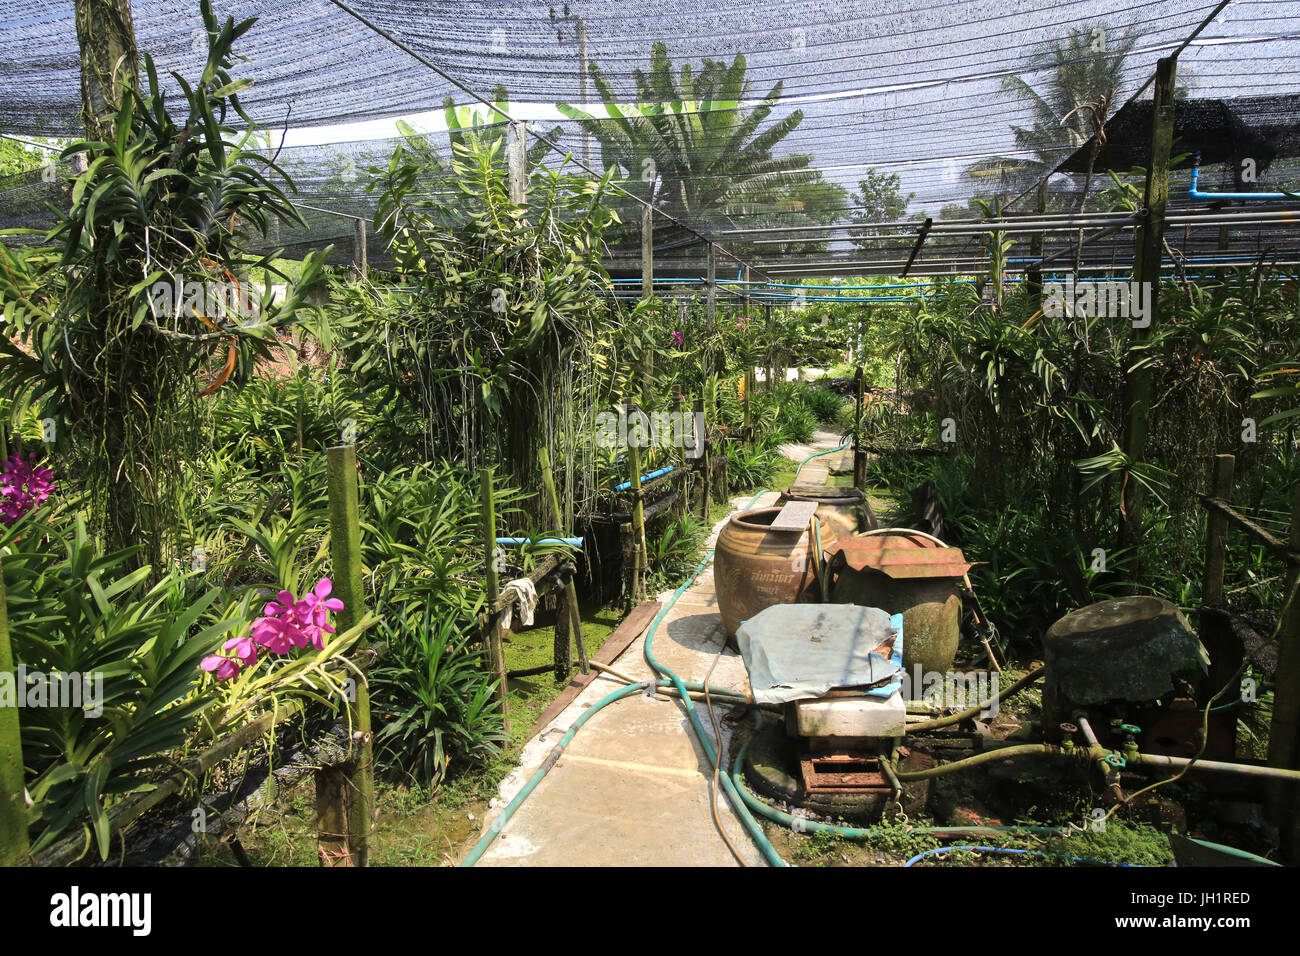 Cultivation and production of orchids.  Thailand. Stock Photo